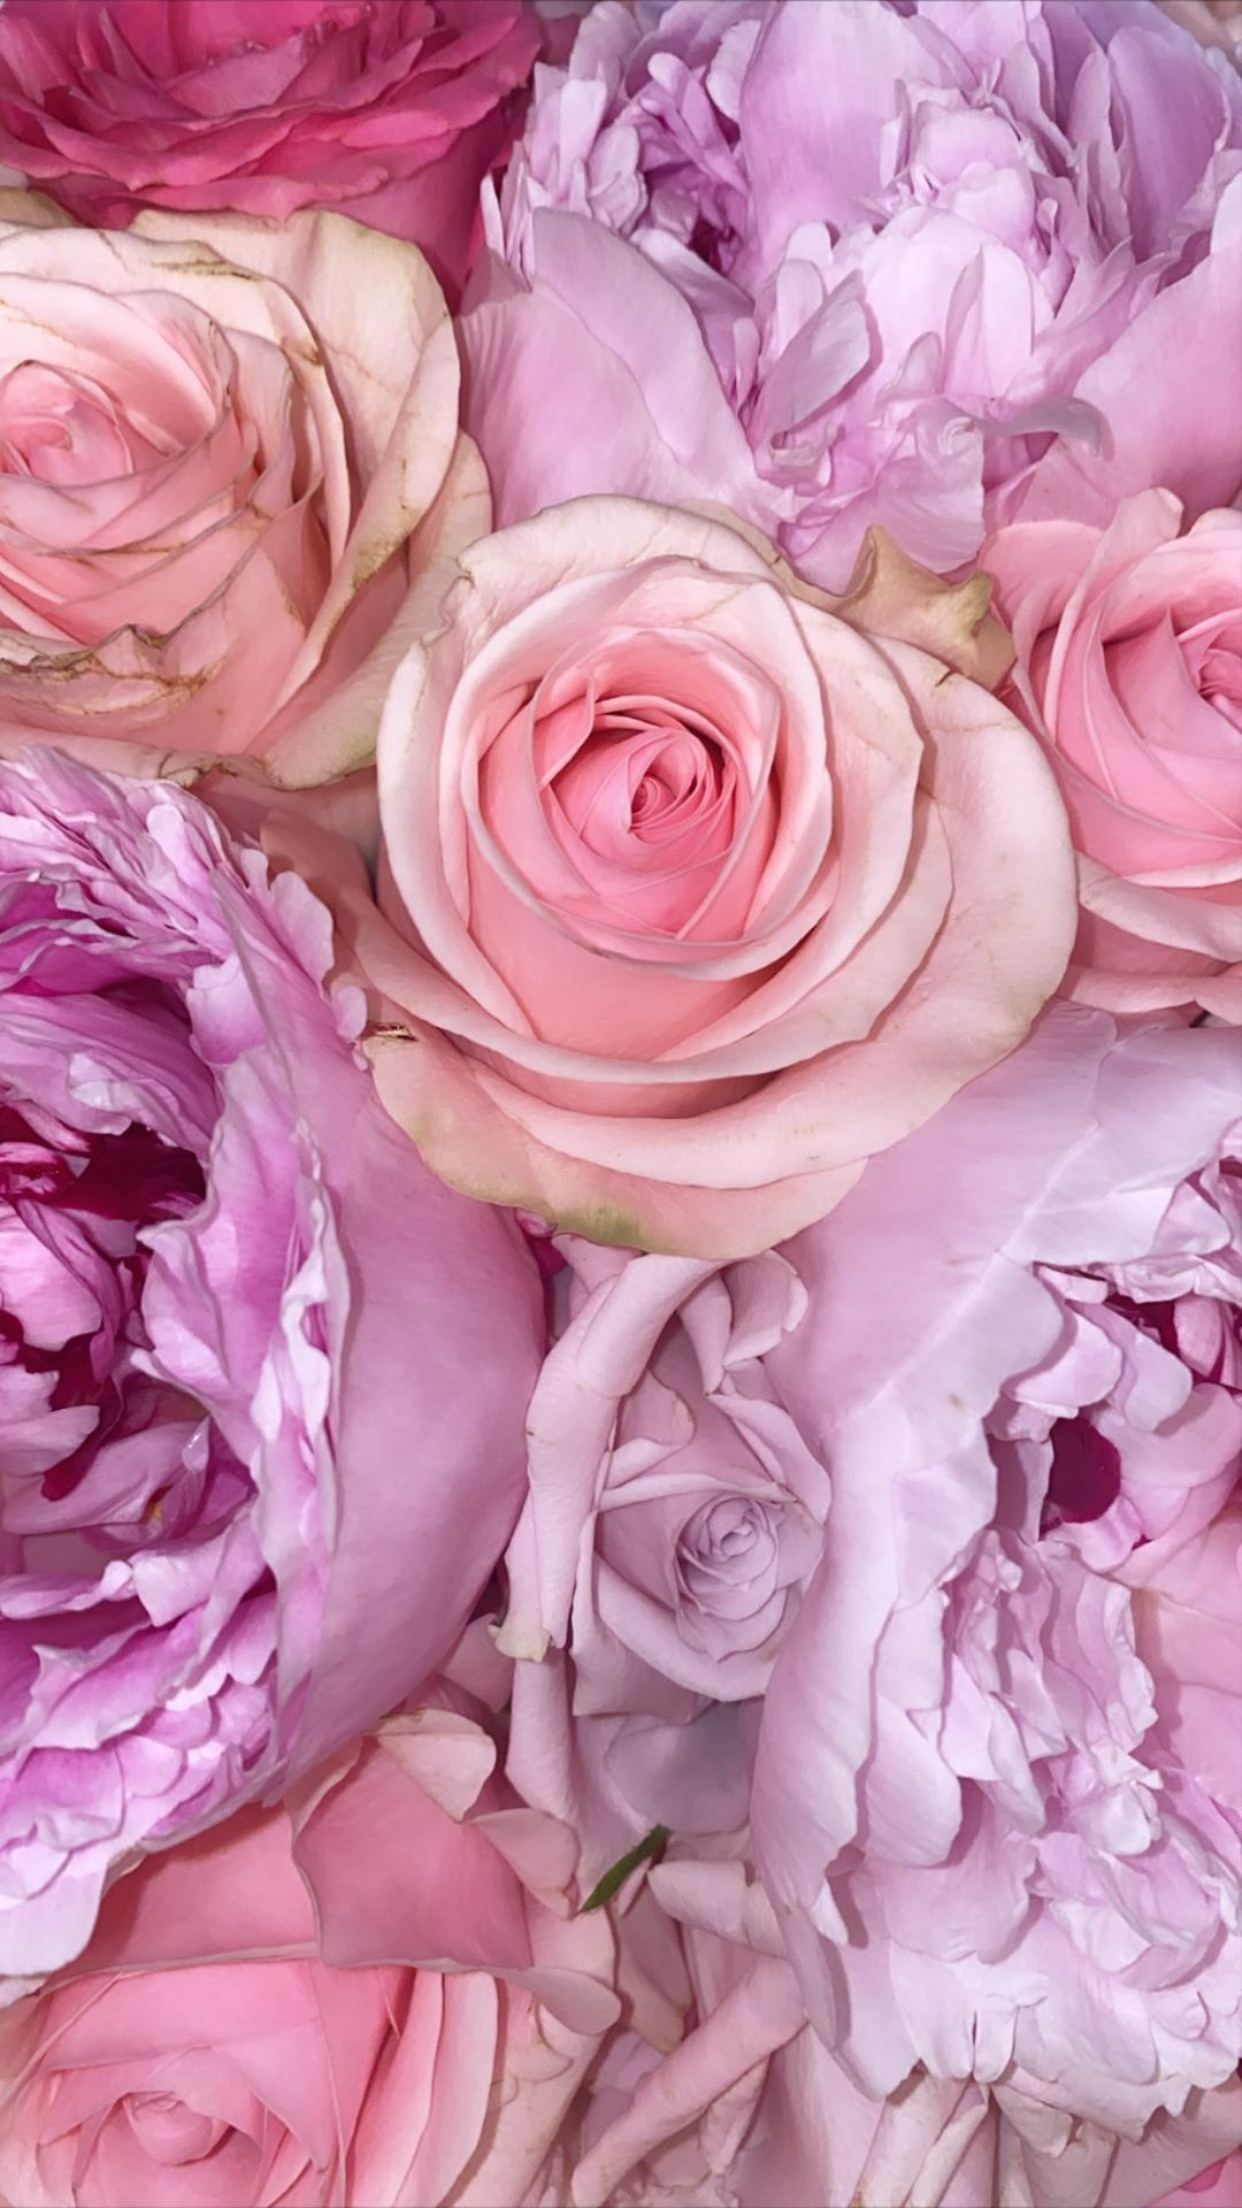 1242x2208 Pink and Purple Roses Wallpaper | Flower iphone wallpaper, Flower background wallpaper, Flower backgrounds